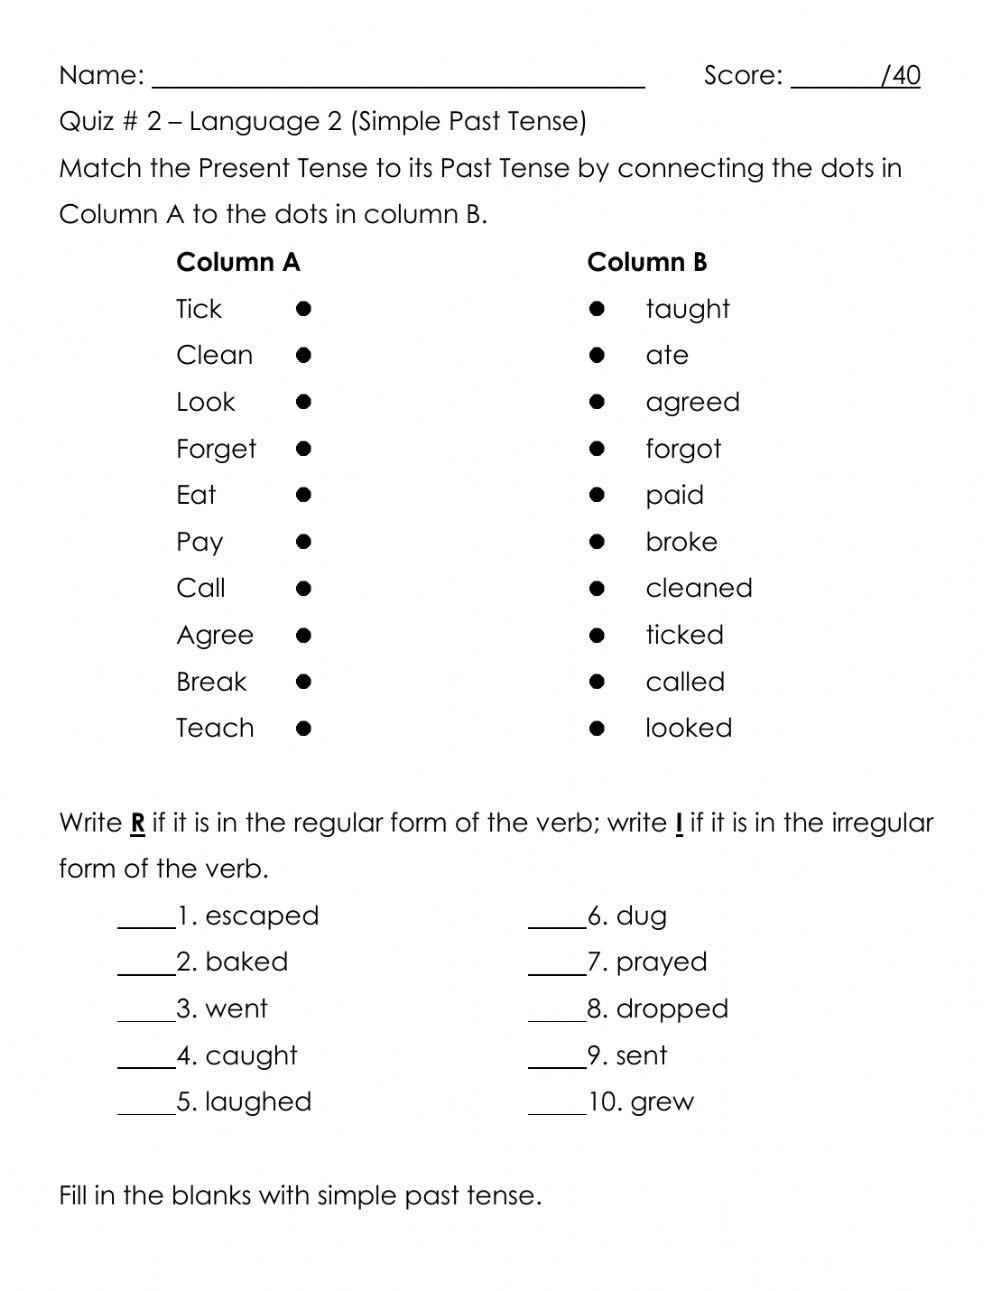 Simple Past Tense online exercise for Grade 2 | Live Worksheets